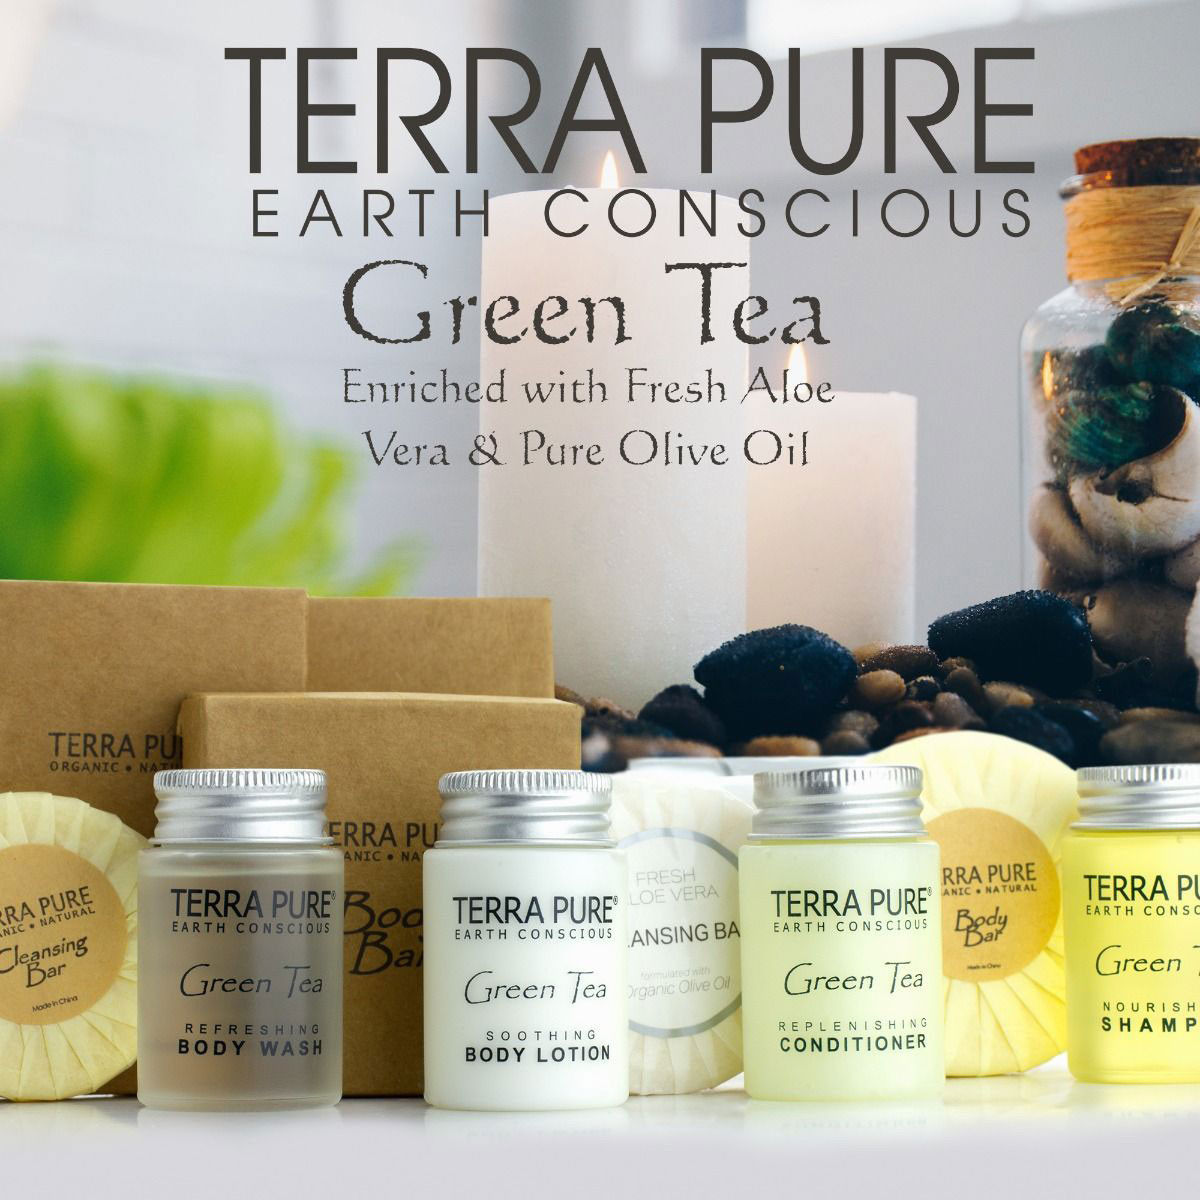 What is terra pure's commitment to their TERRA PURE GREEN TEA Collection?